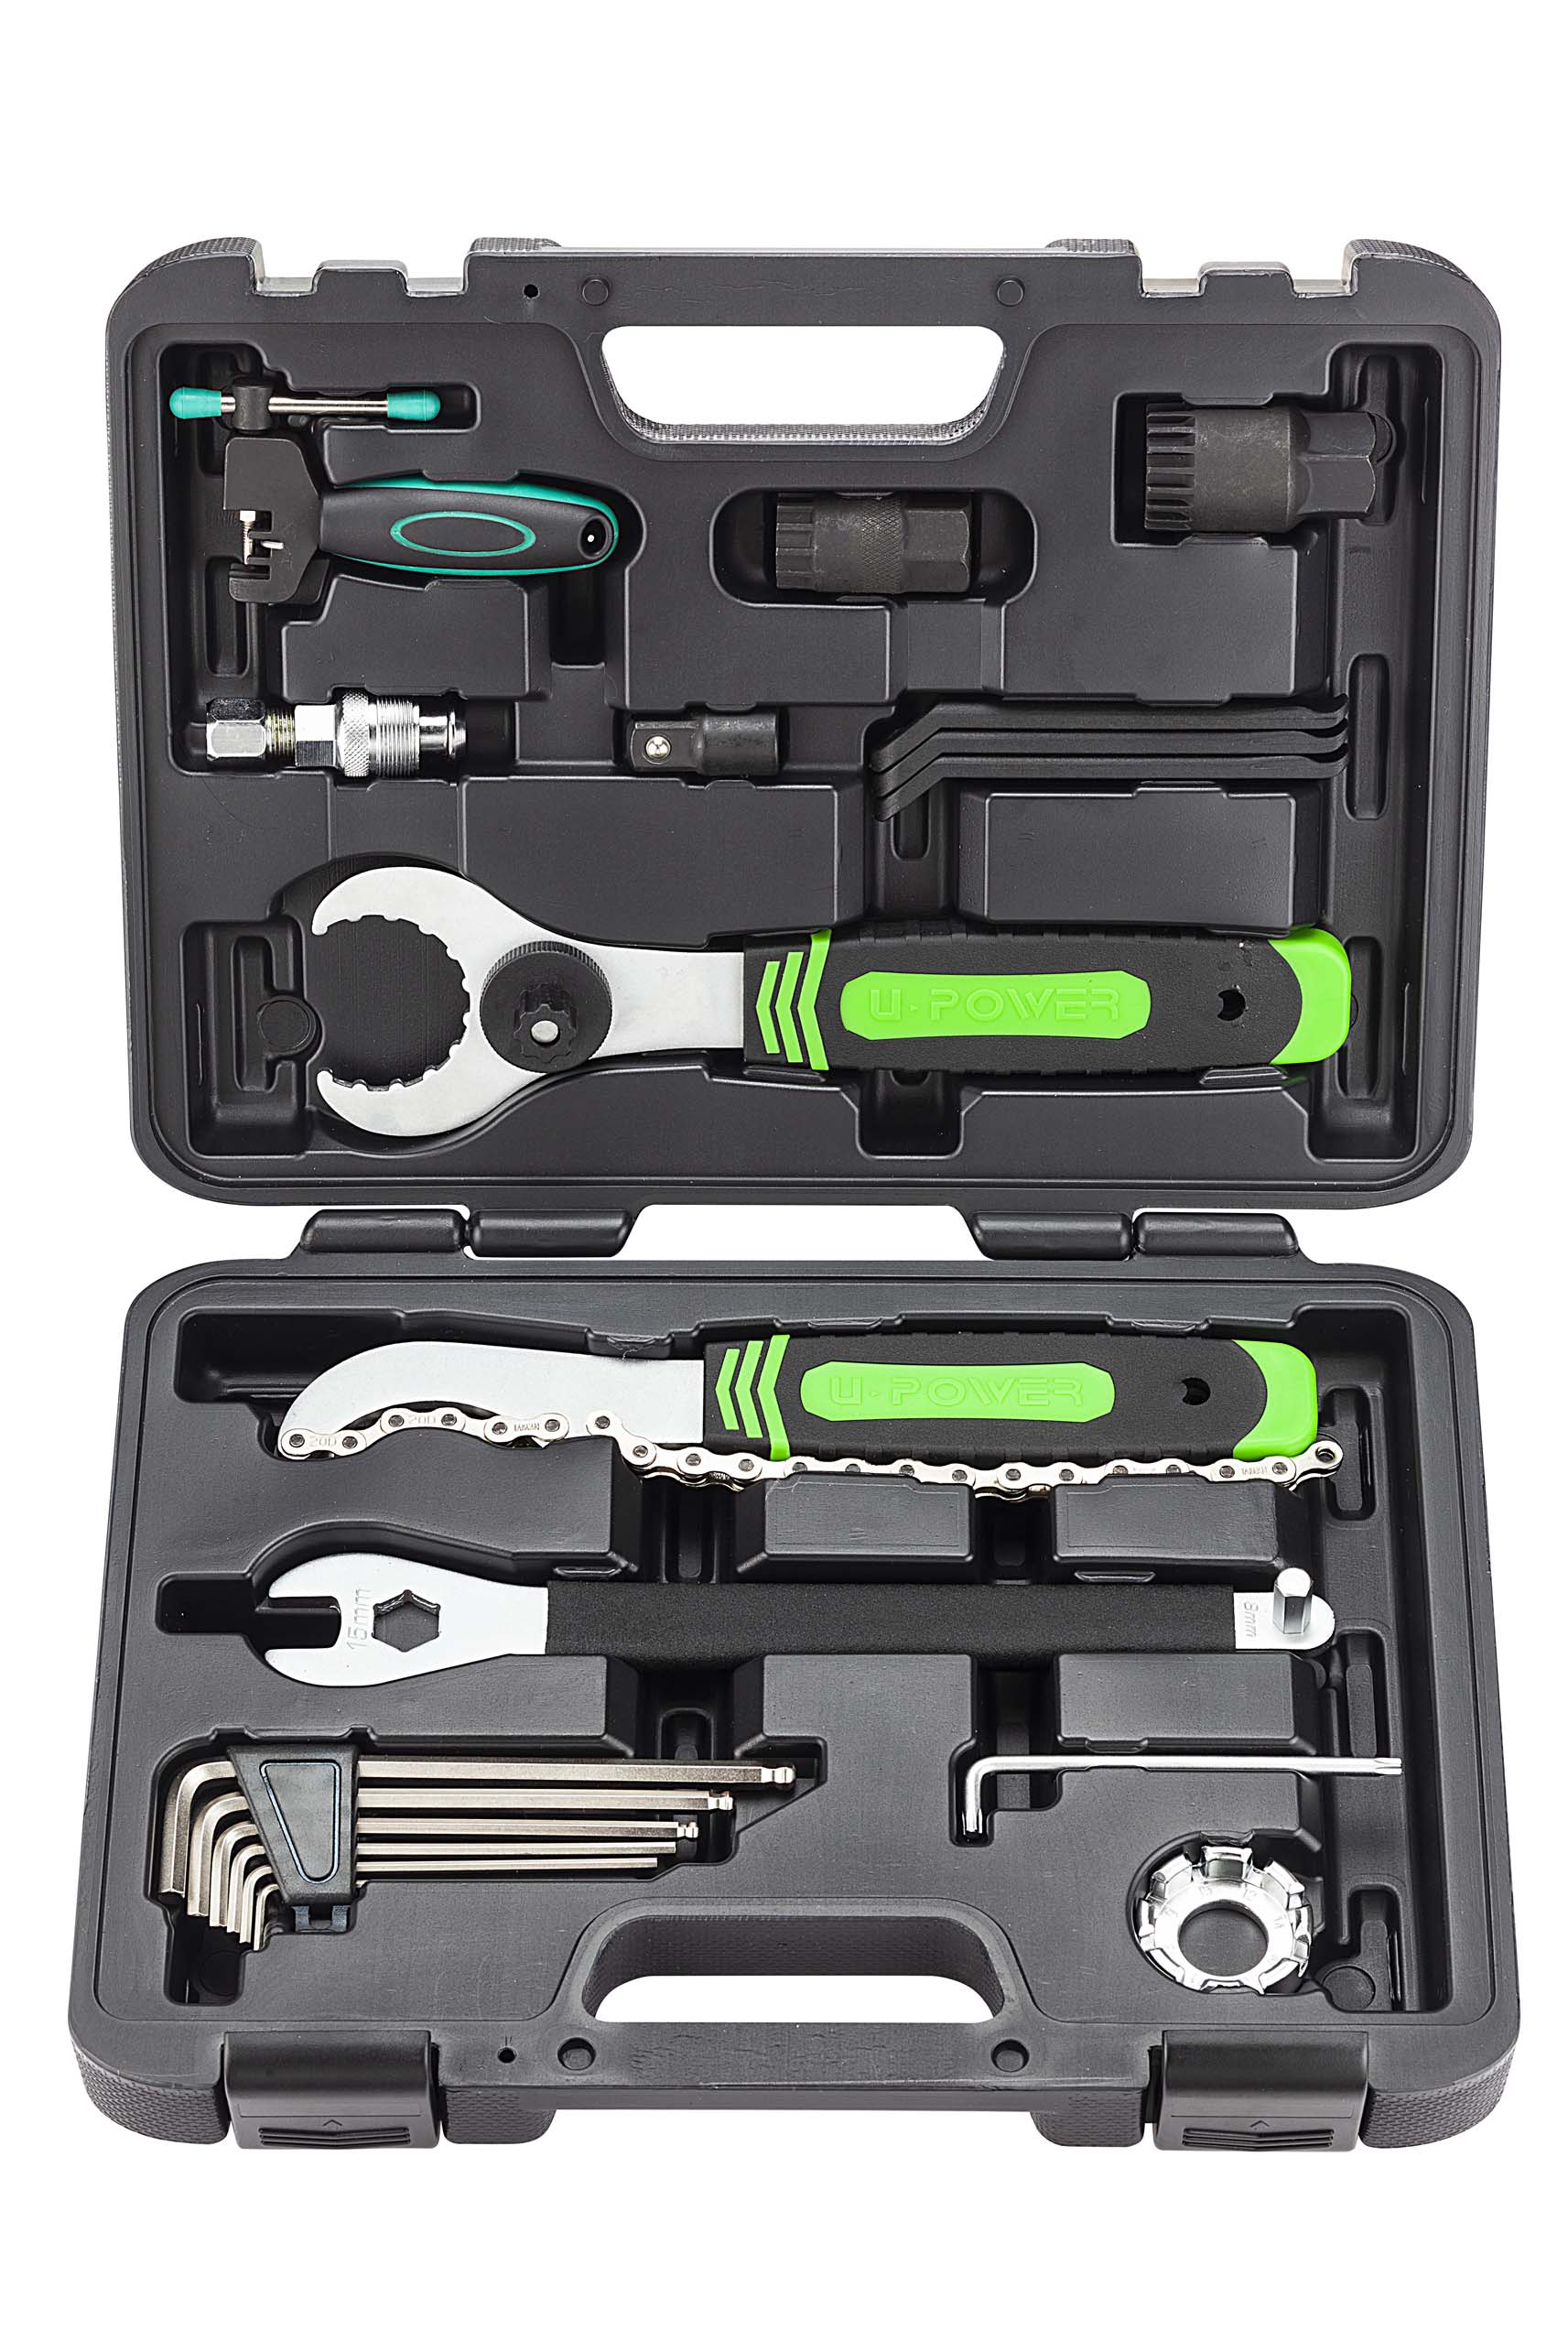 21 in 1 tools set